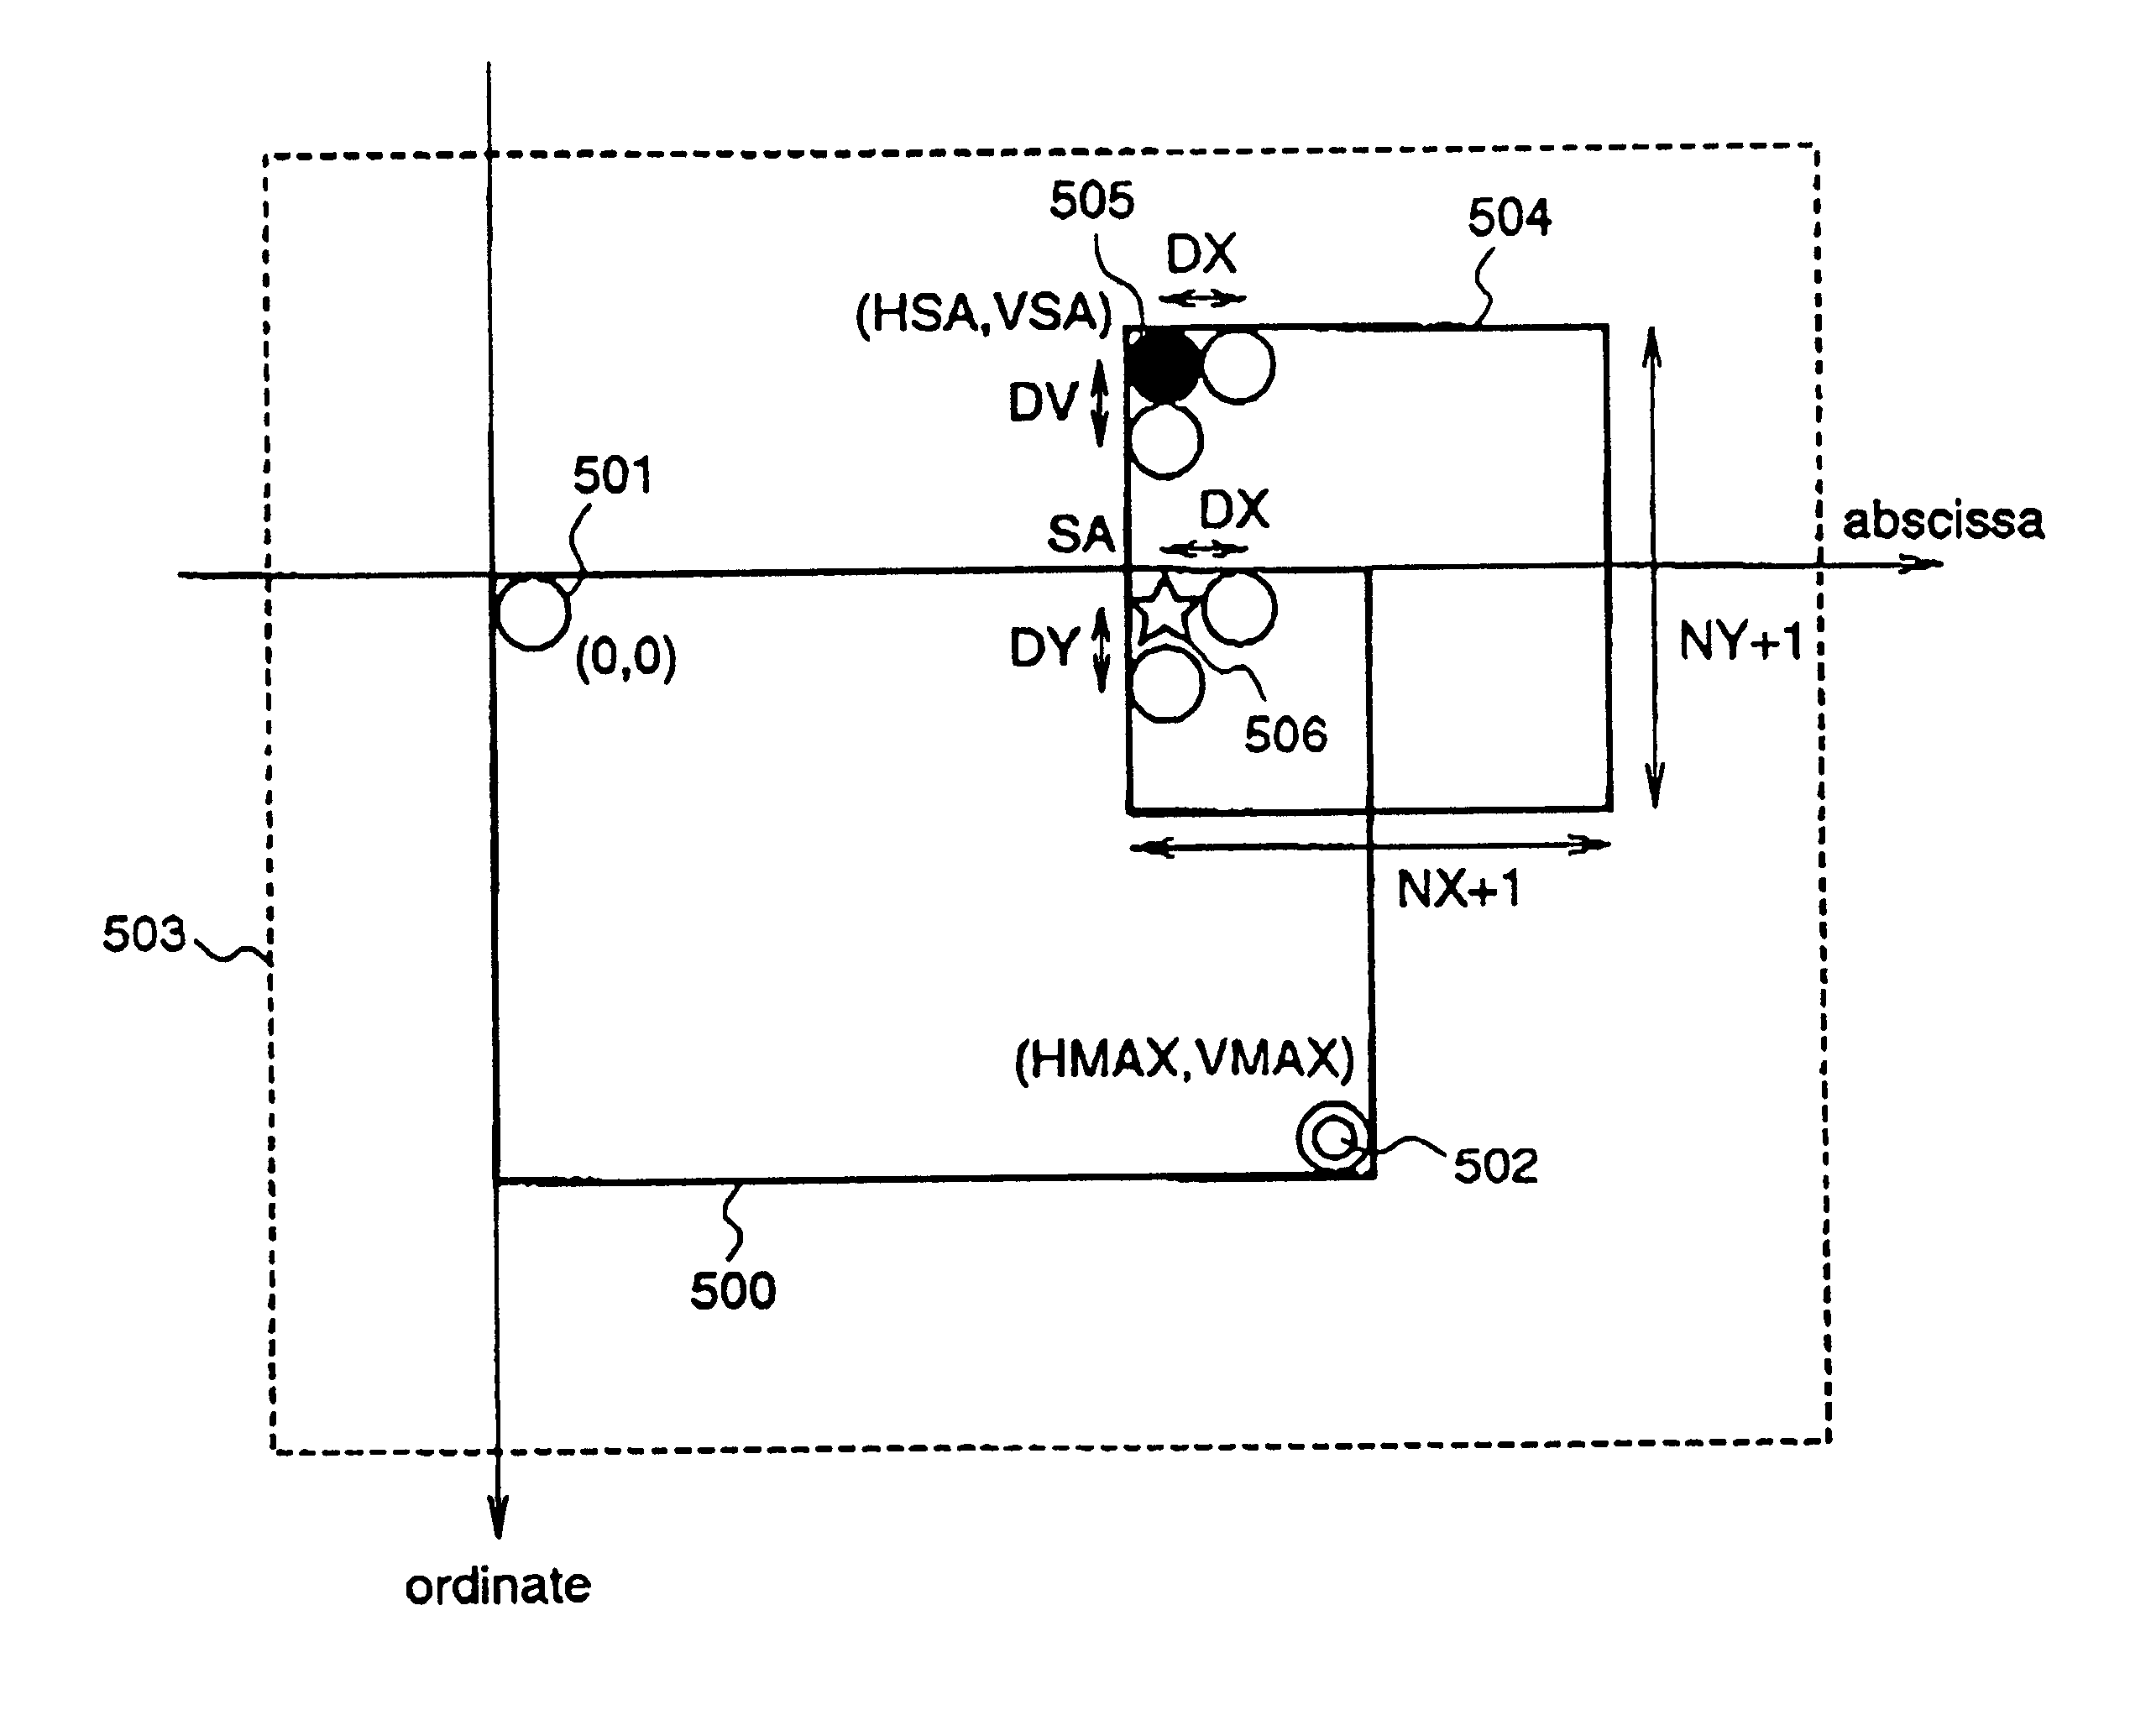 Video processing apparatus for performing address generation and control, and method therefor